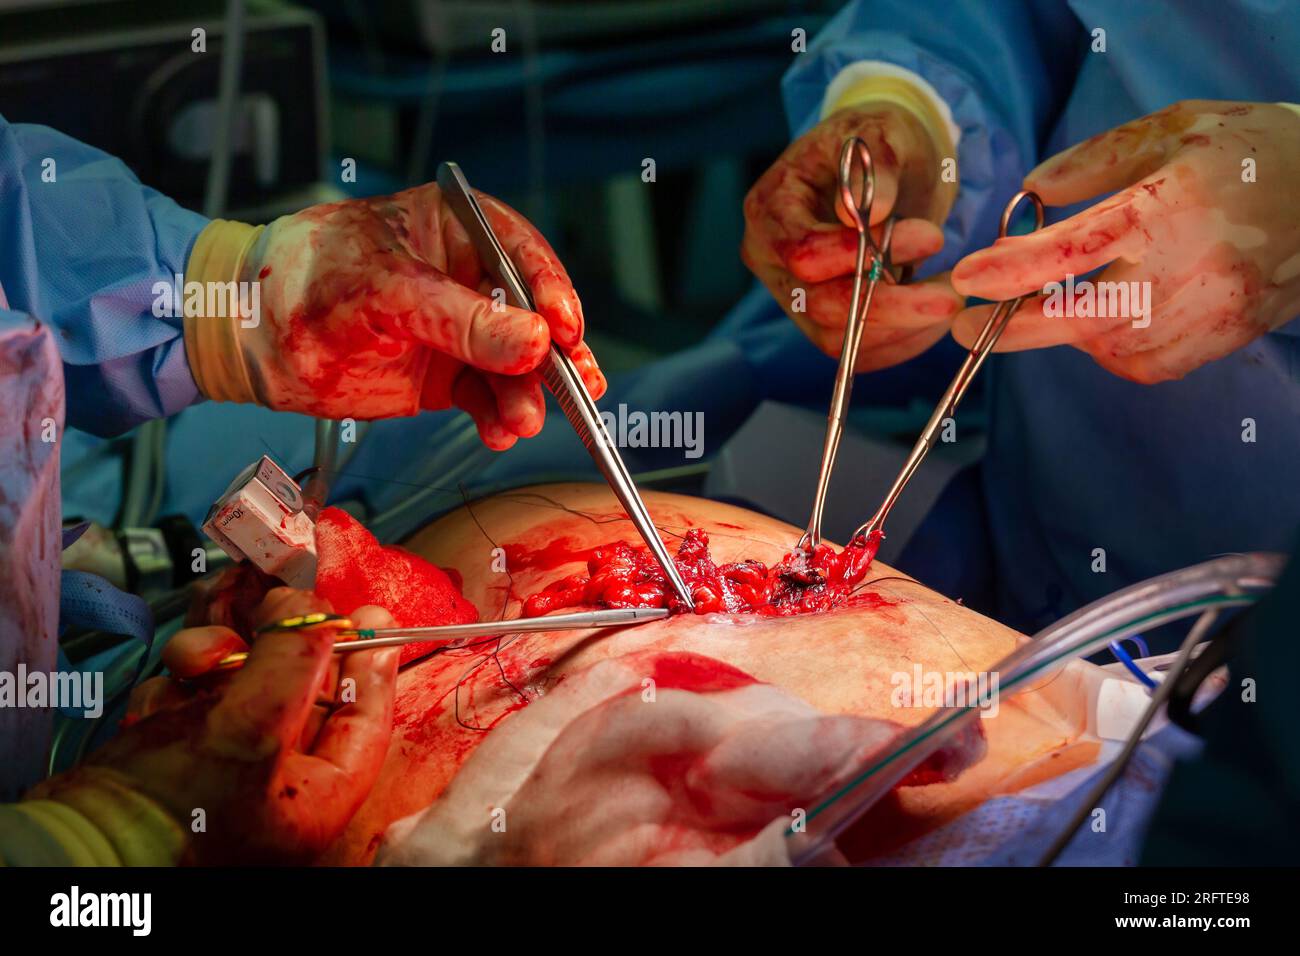 Surgical operation, closeup on operating field and hands of surgeons. Stock Photo